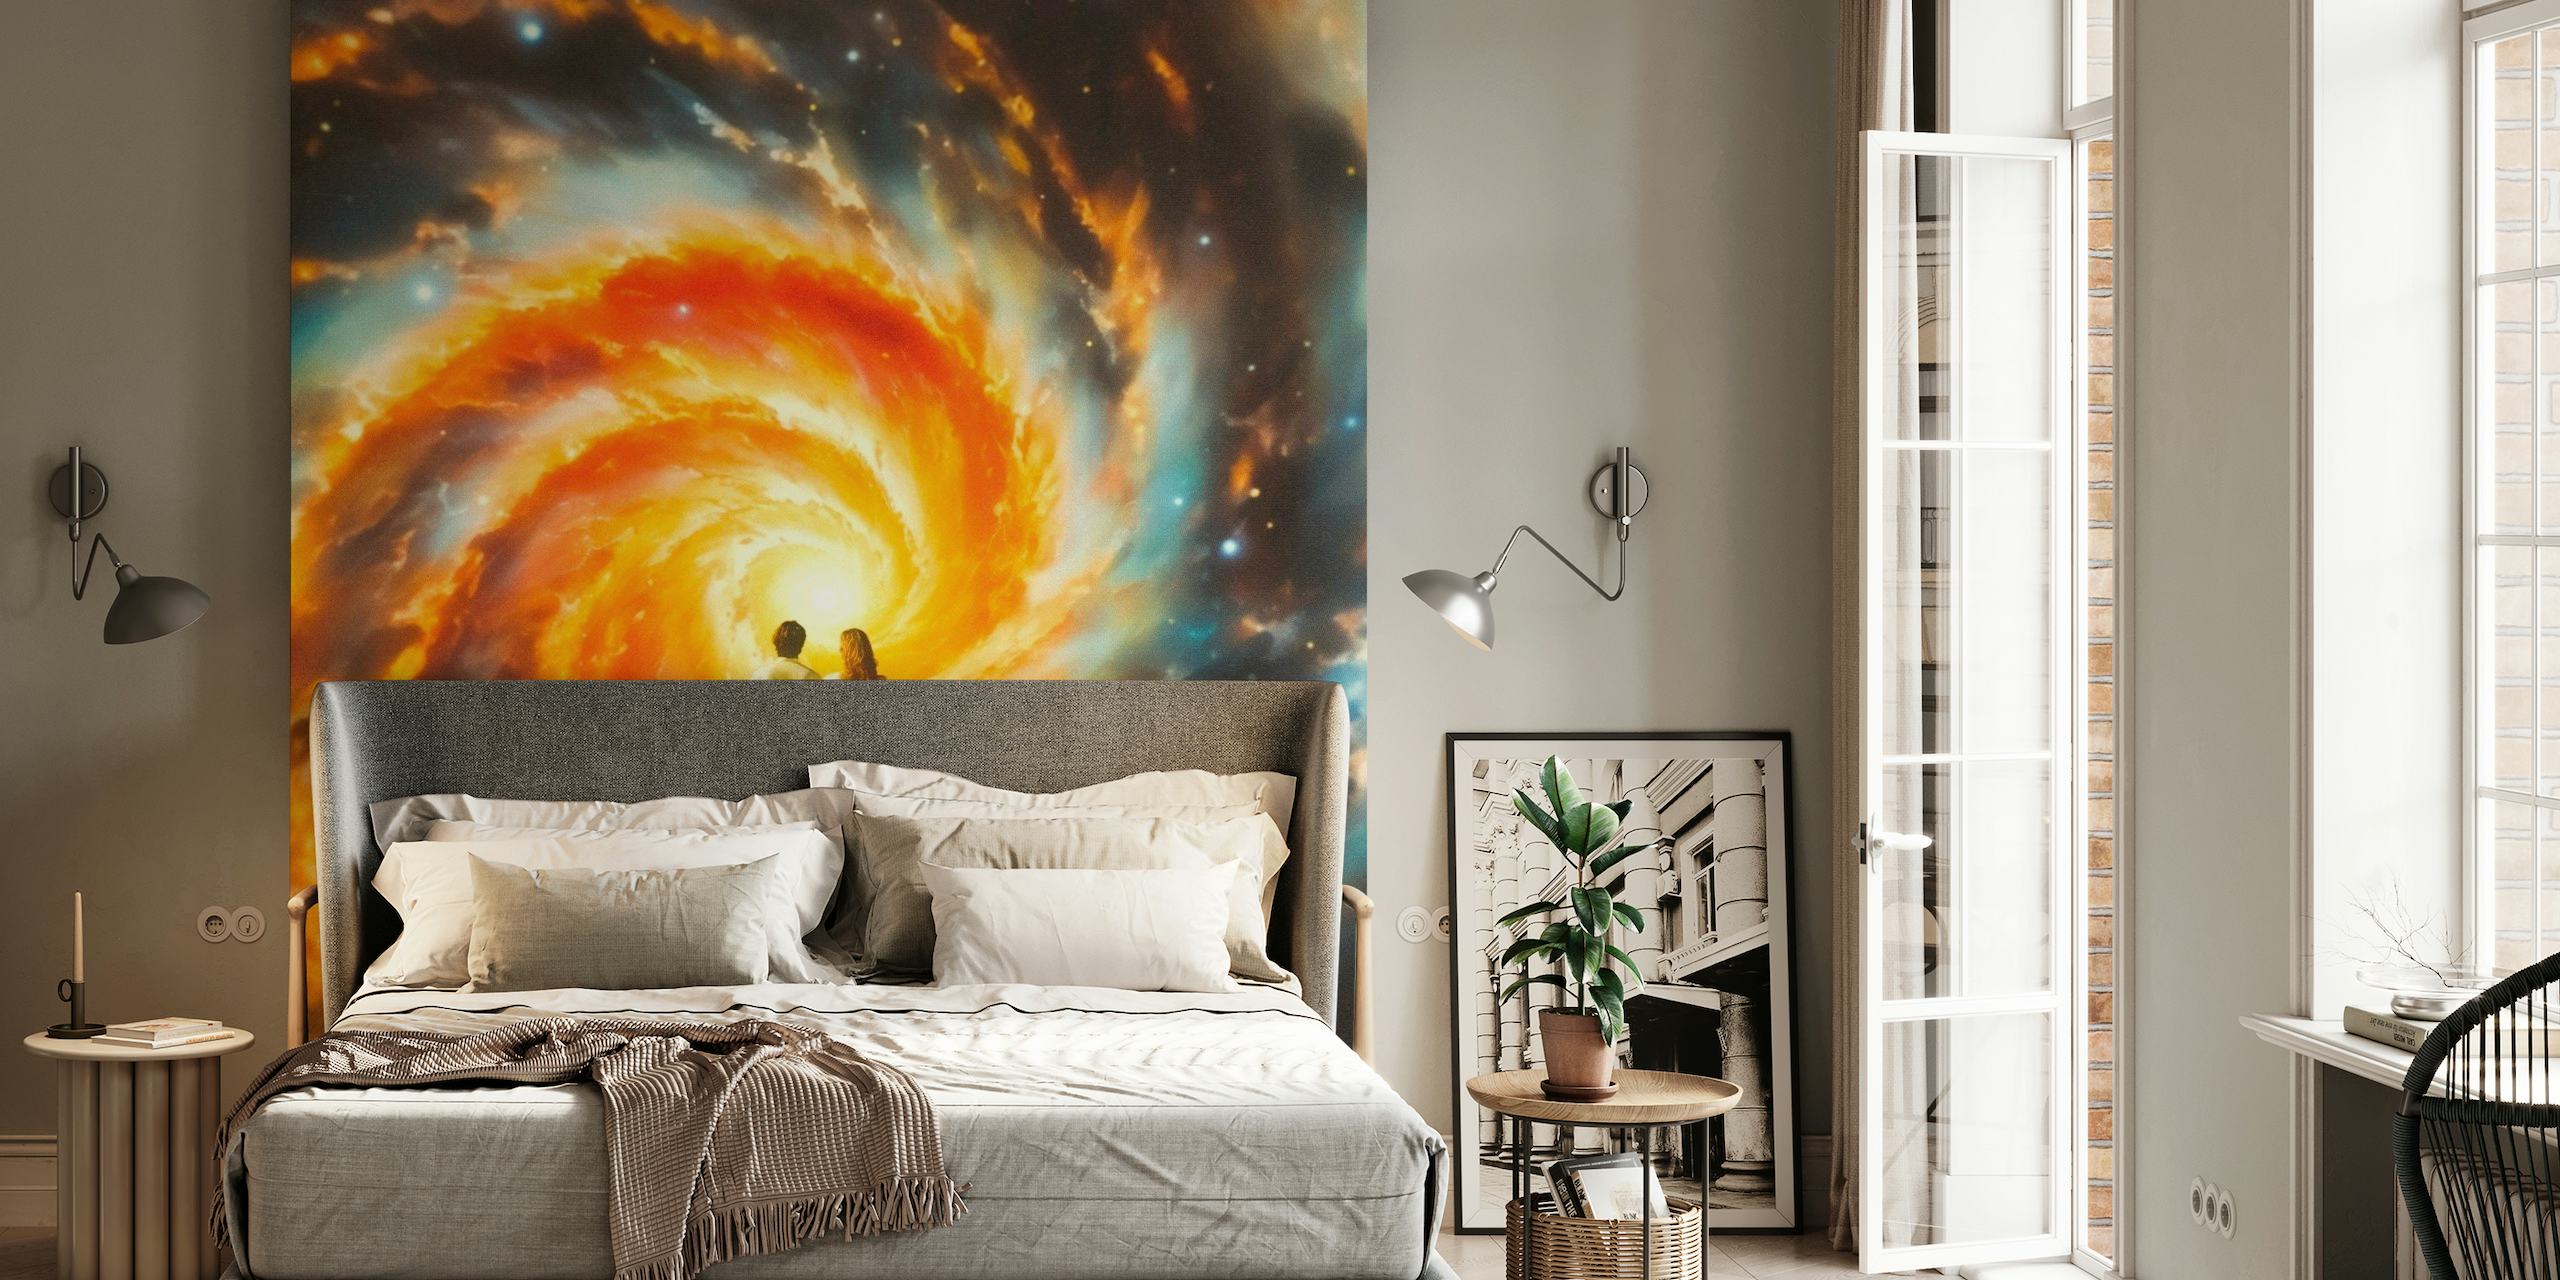 A couple holding hands against a vibrant galaxy swirl wall mural